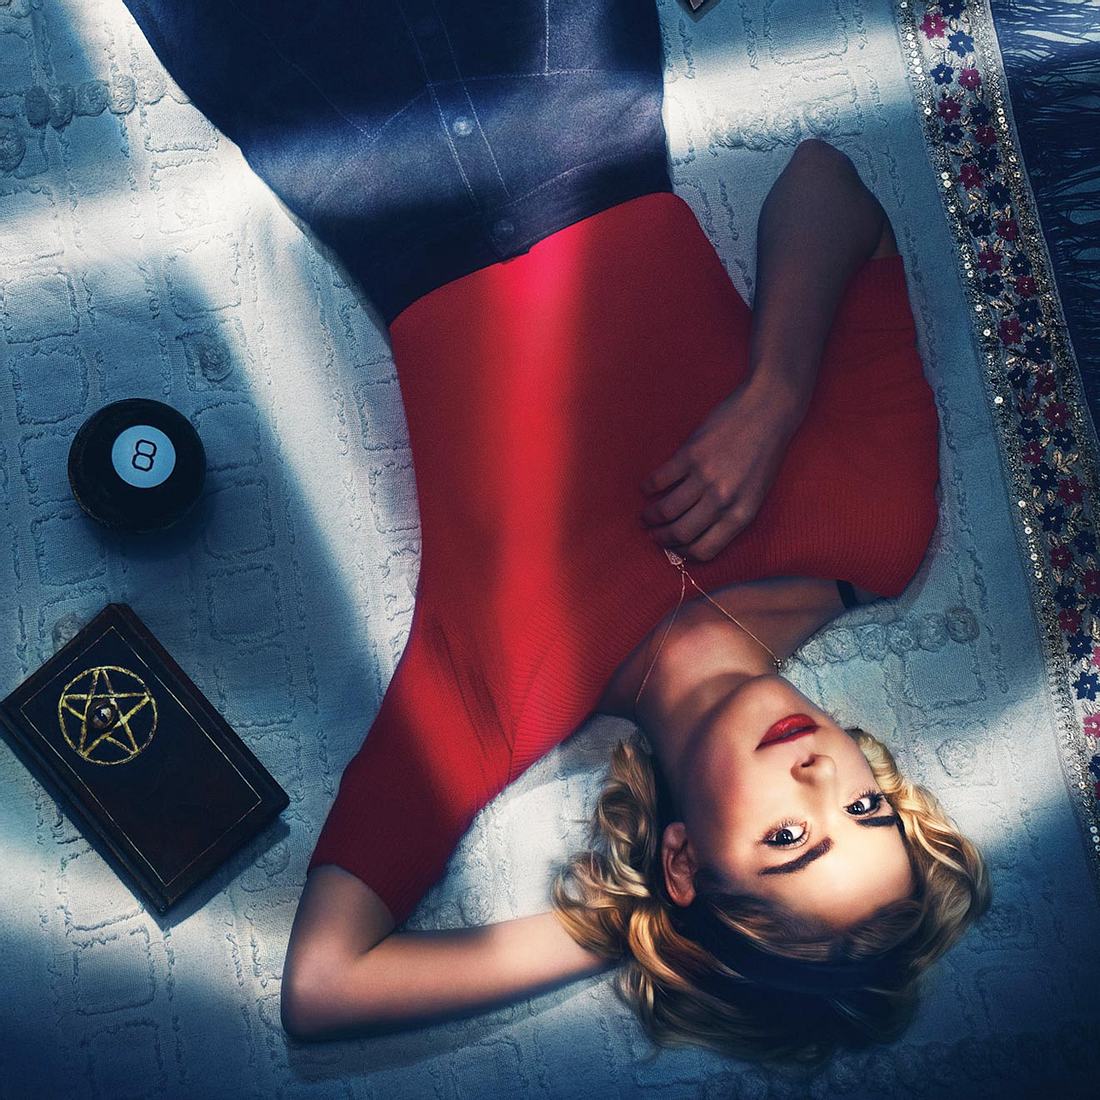 Chilling Adventures of Sabrina: Girl-Power im WICCA-Club